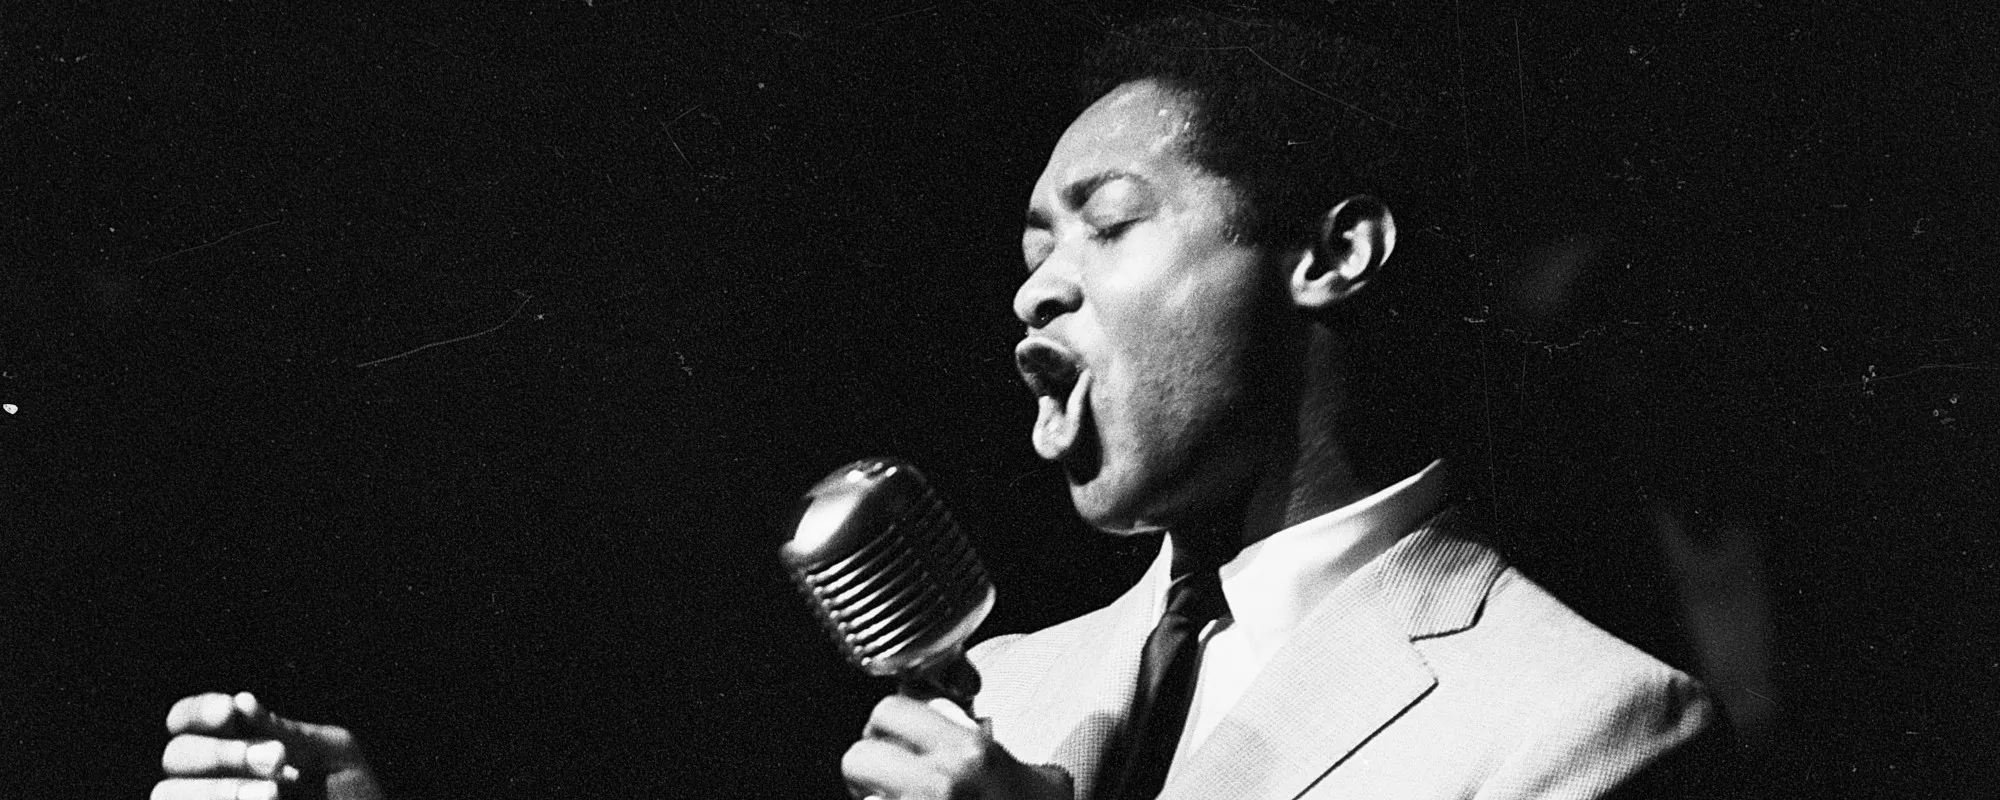 Behind the Mysterious Death of Sam Cooke